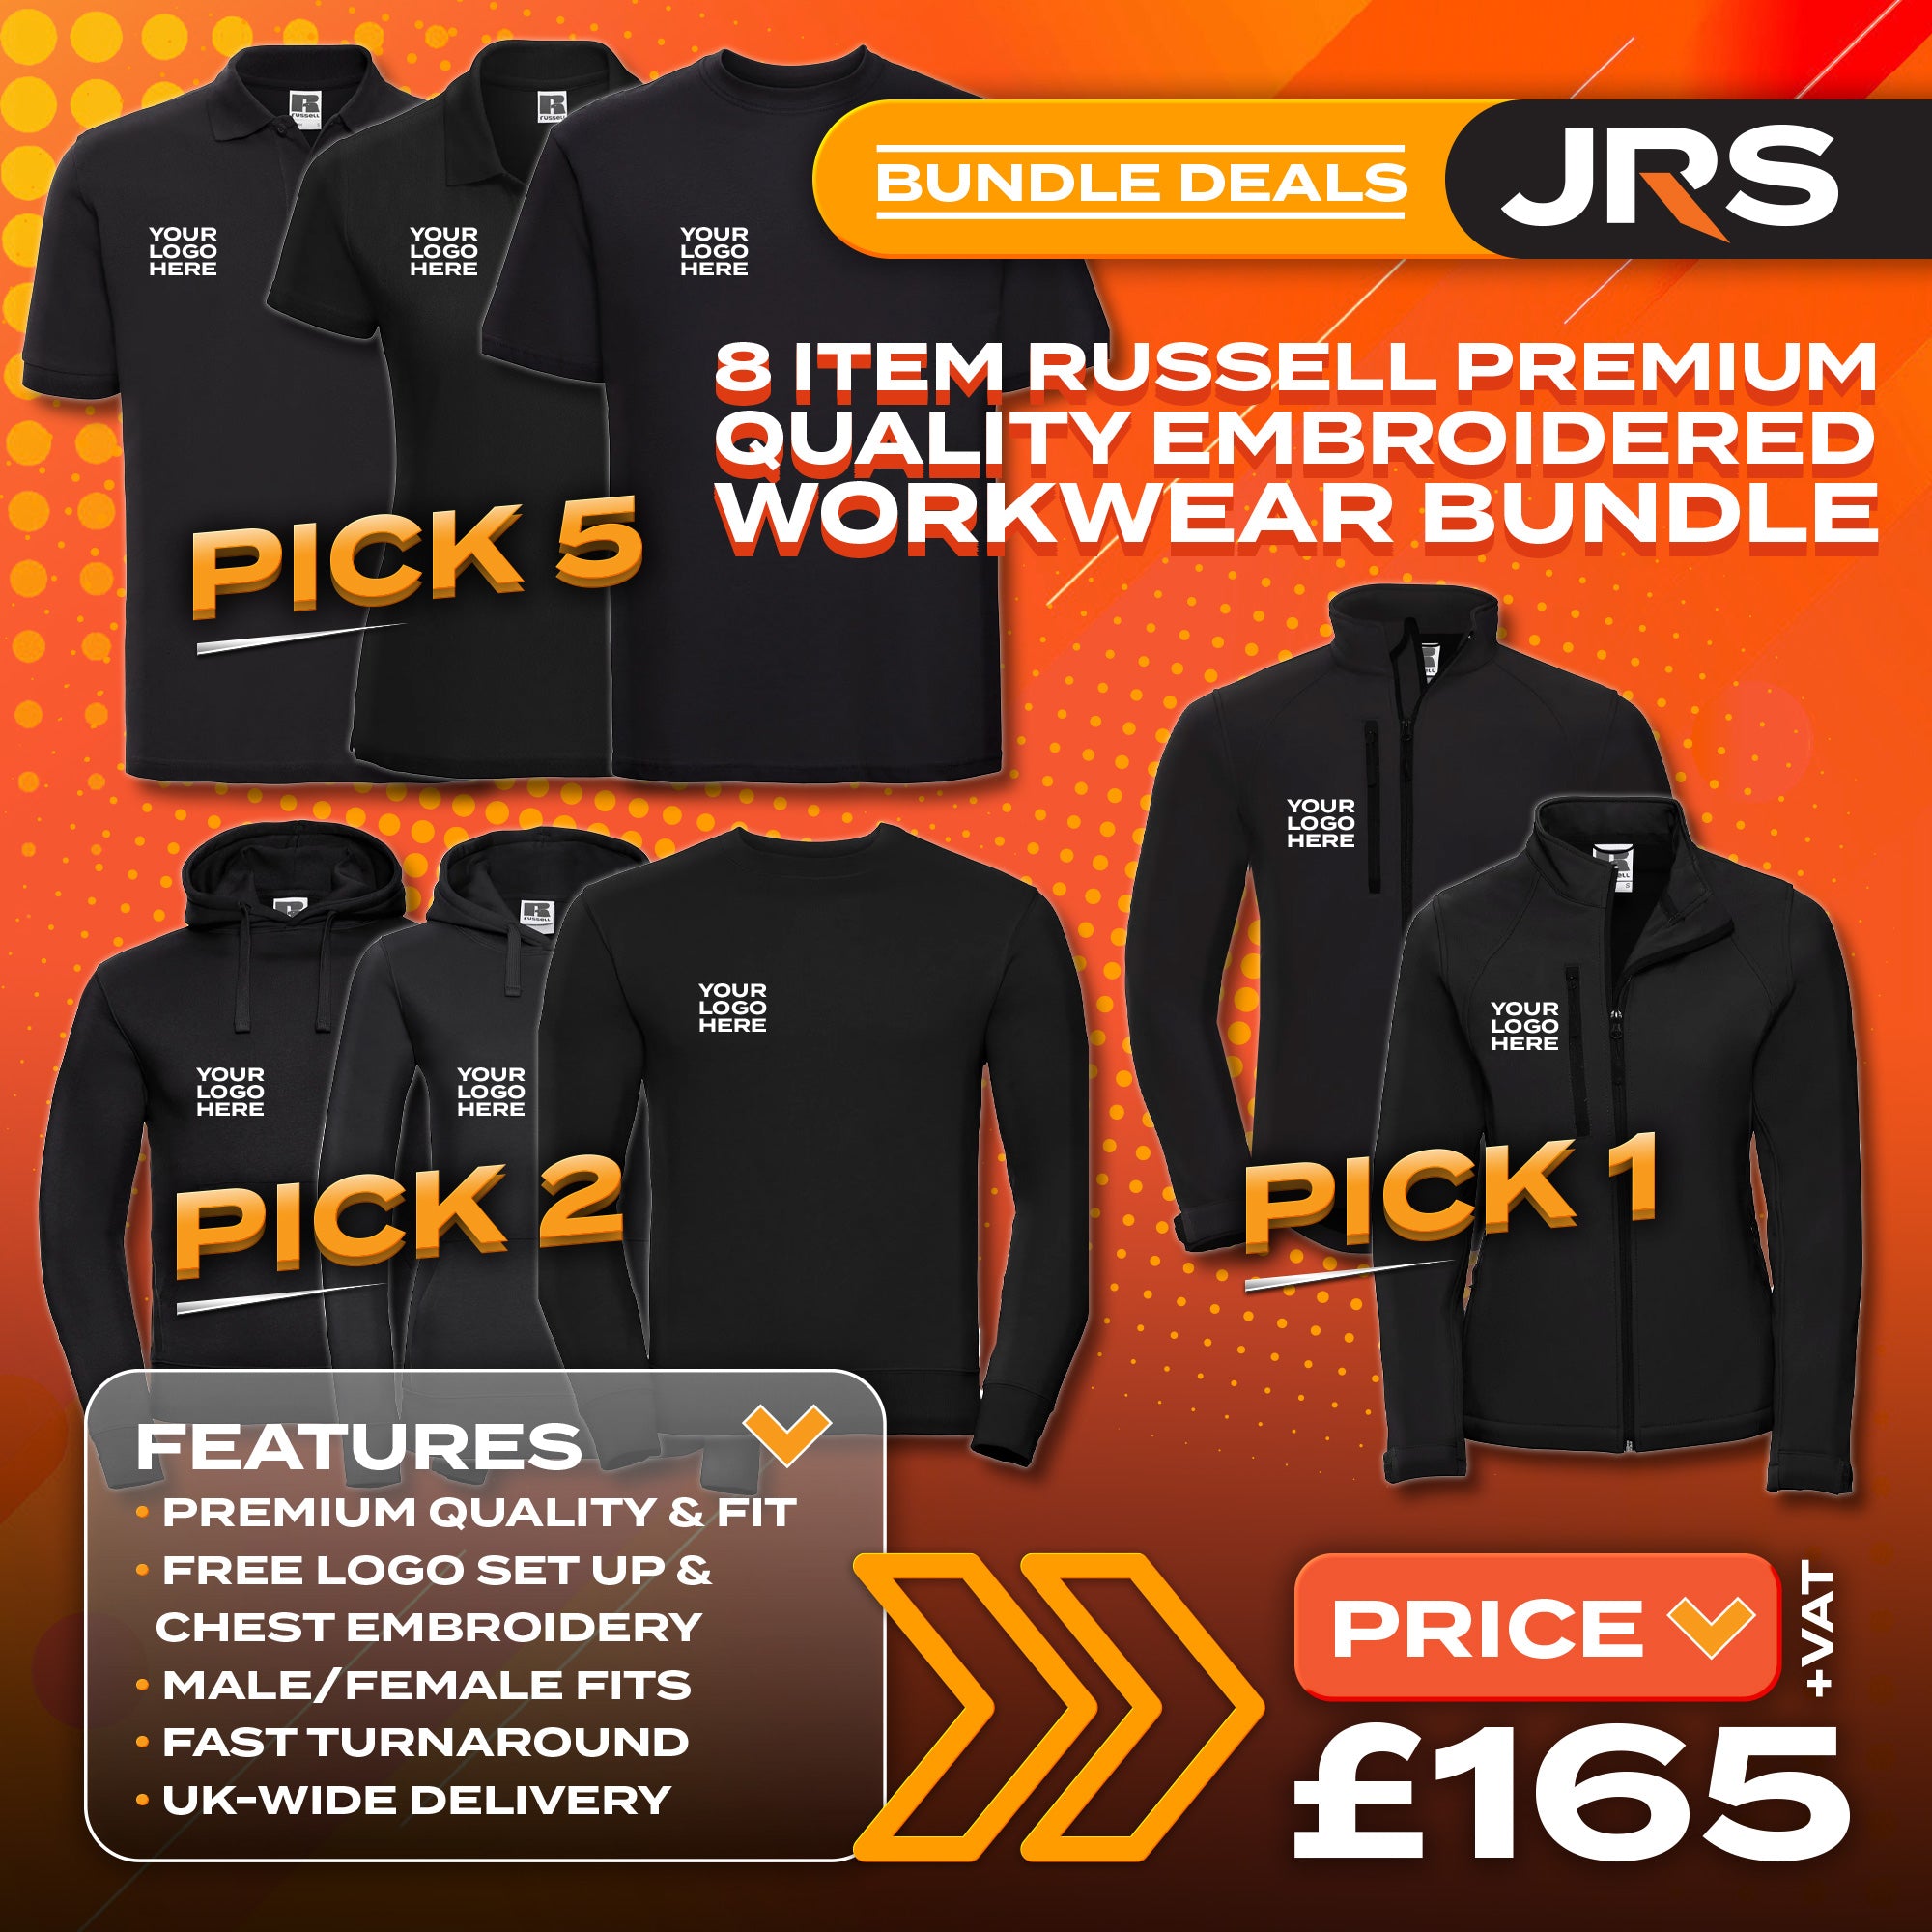 8 Item Russell Premium Quality Embroidered Workwear Bundle with Free Logo